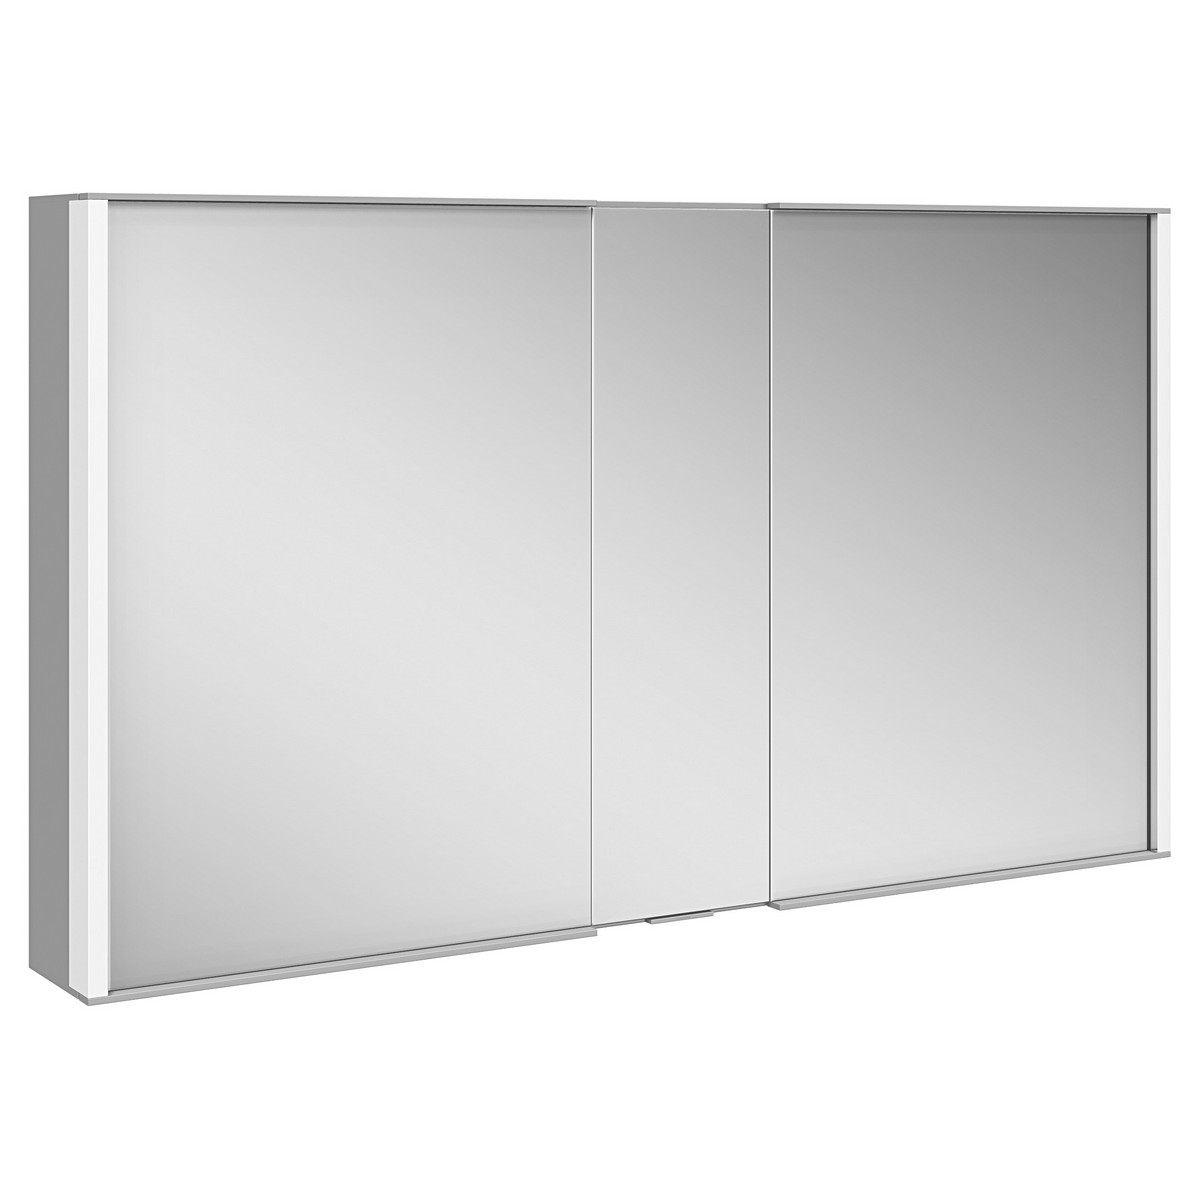 KEUCO 12804171351 ROYAL MATCH 47 1/4 W X 6 1/4 D X 27 1/2 H INCH 2-DOOR WALL MOUNTED MIRROR MEDICINE CABINET IN ALUMINUM